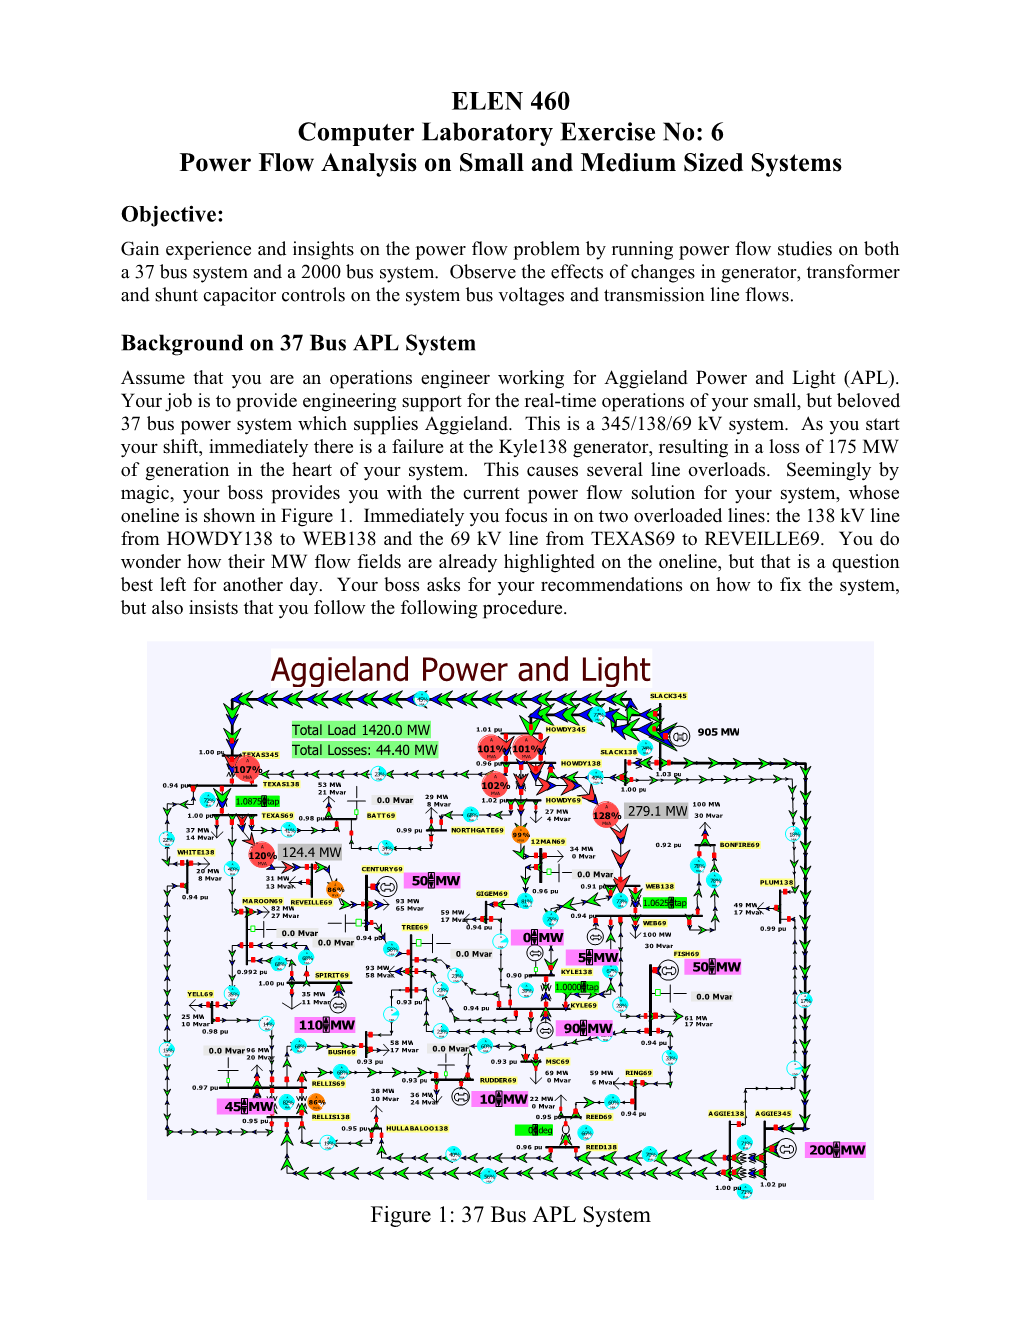 Power Flow Analysis on Small and Medium Sized Systems